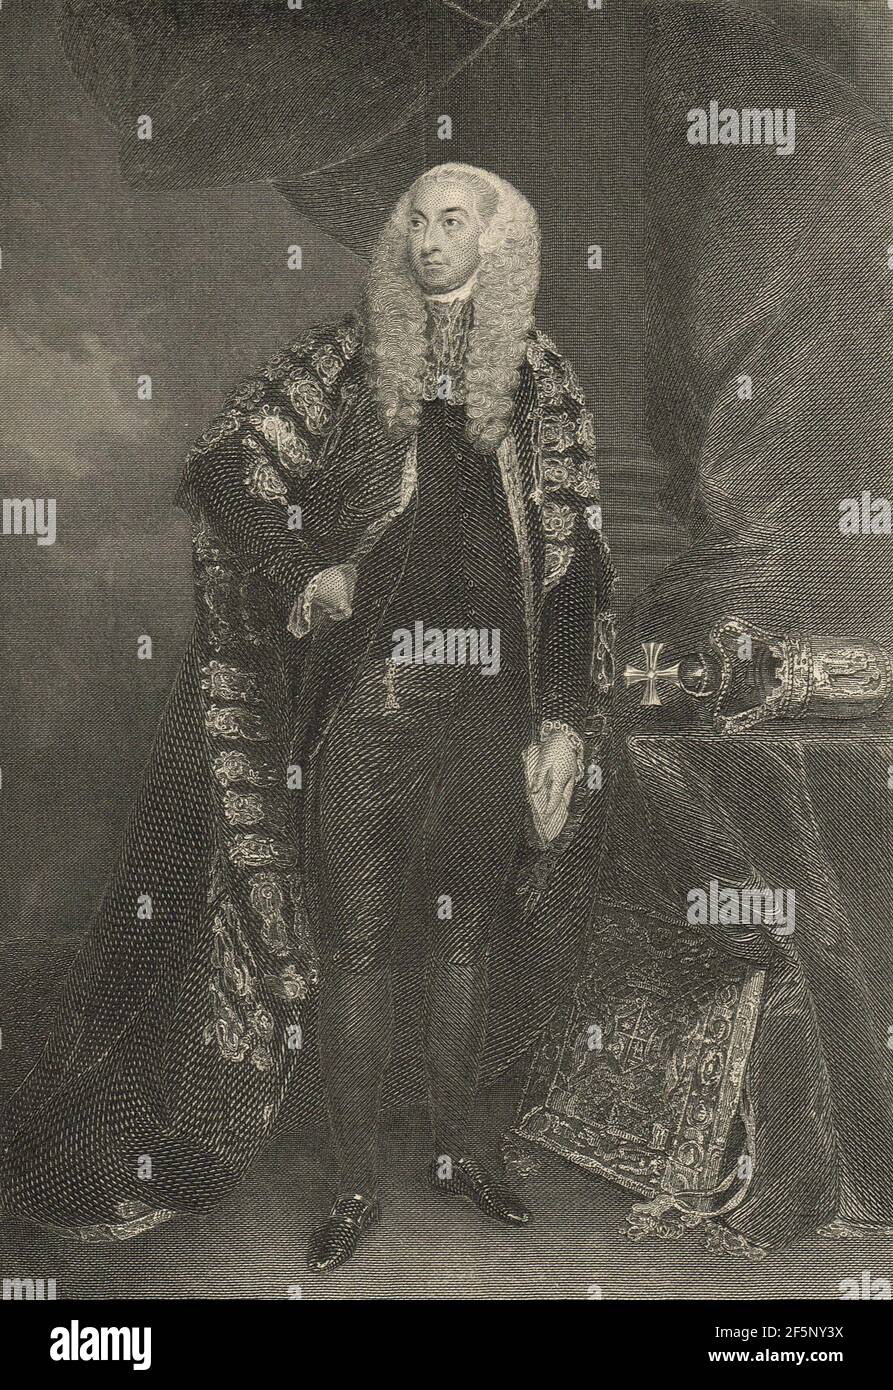 John FitzGibbon, 1st Earl of Clare, Lord Chancellor of Ireland during the  Irish Rebellion of 1798 Stock Photo